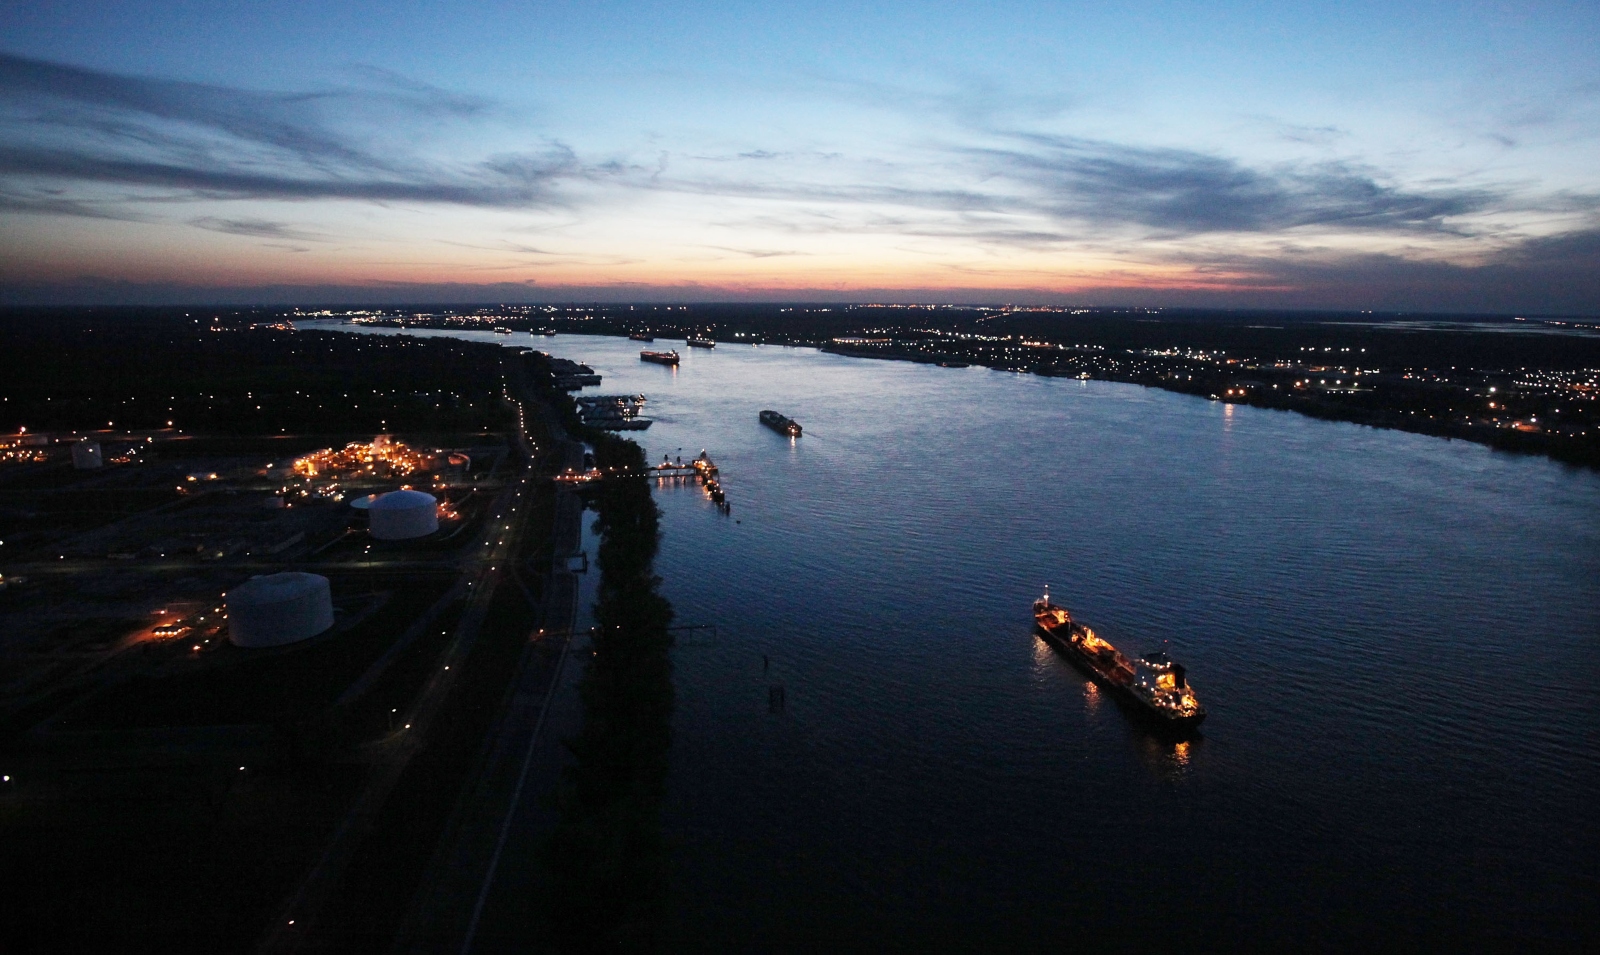 A wide photo of the Mississippi River from above, at twilight. Several cargo ships are in the river.